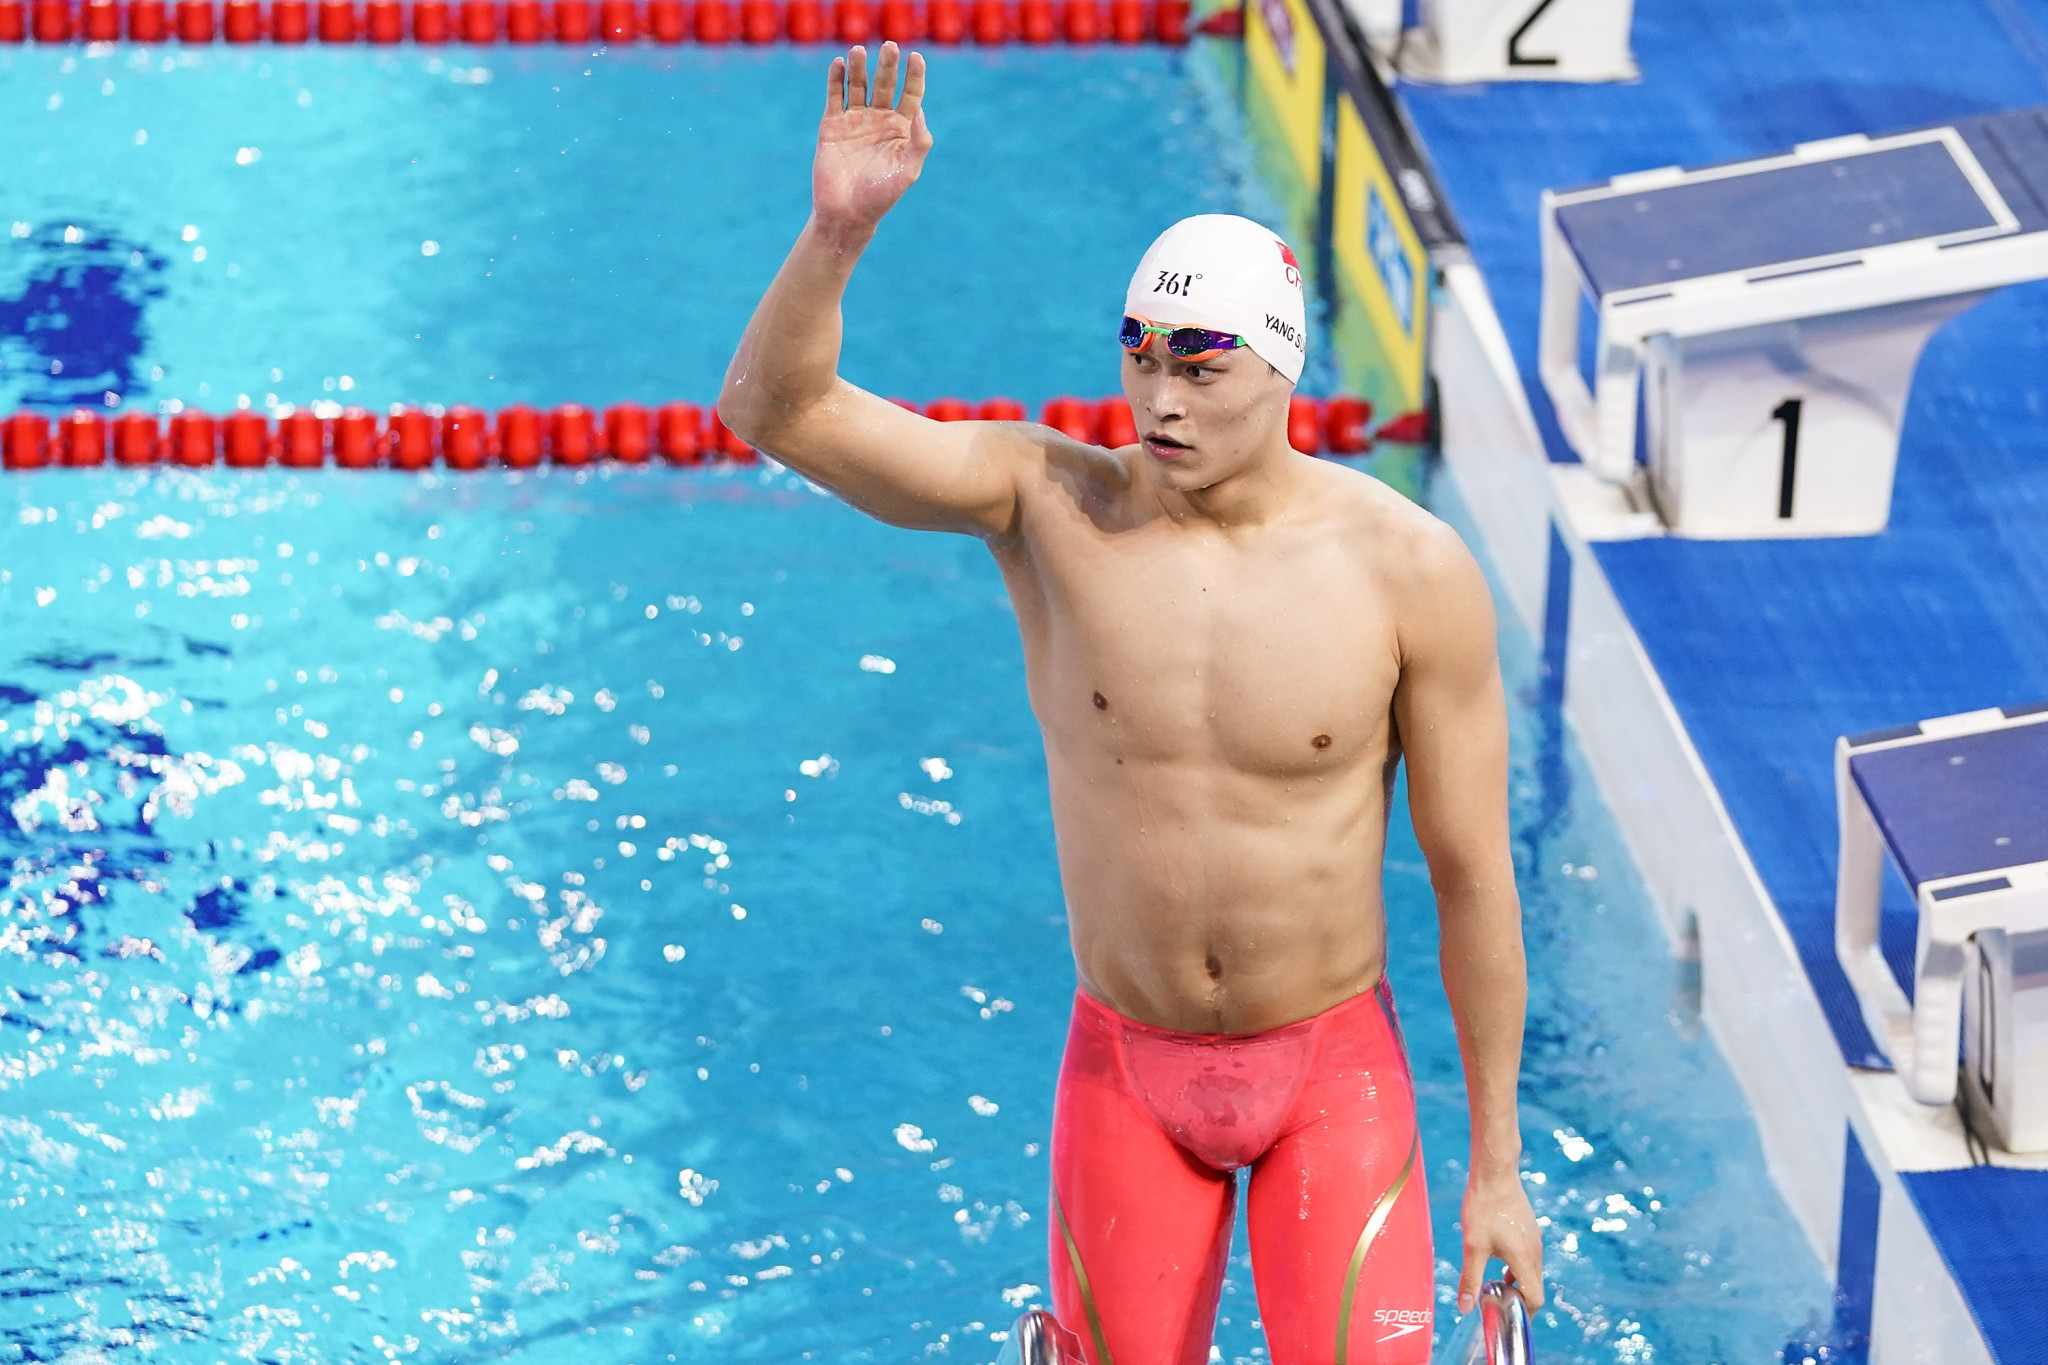 Controversial Chinese athlete Sun secures two gold medals at FINA Champions Swim Series